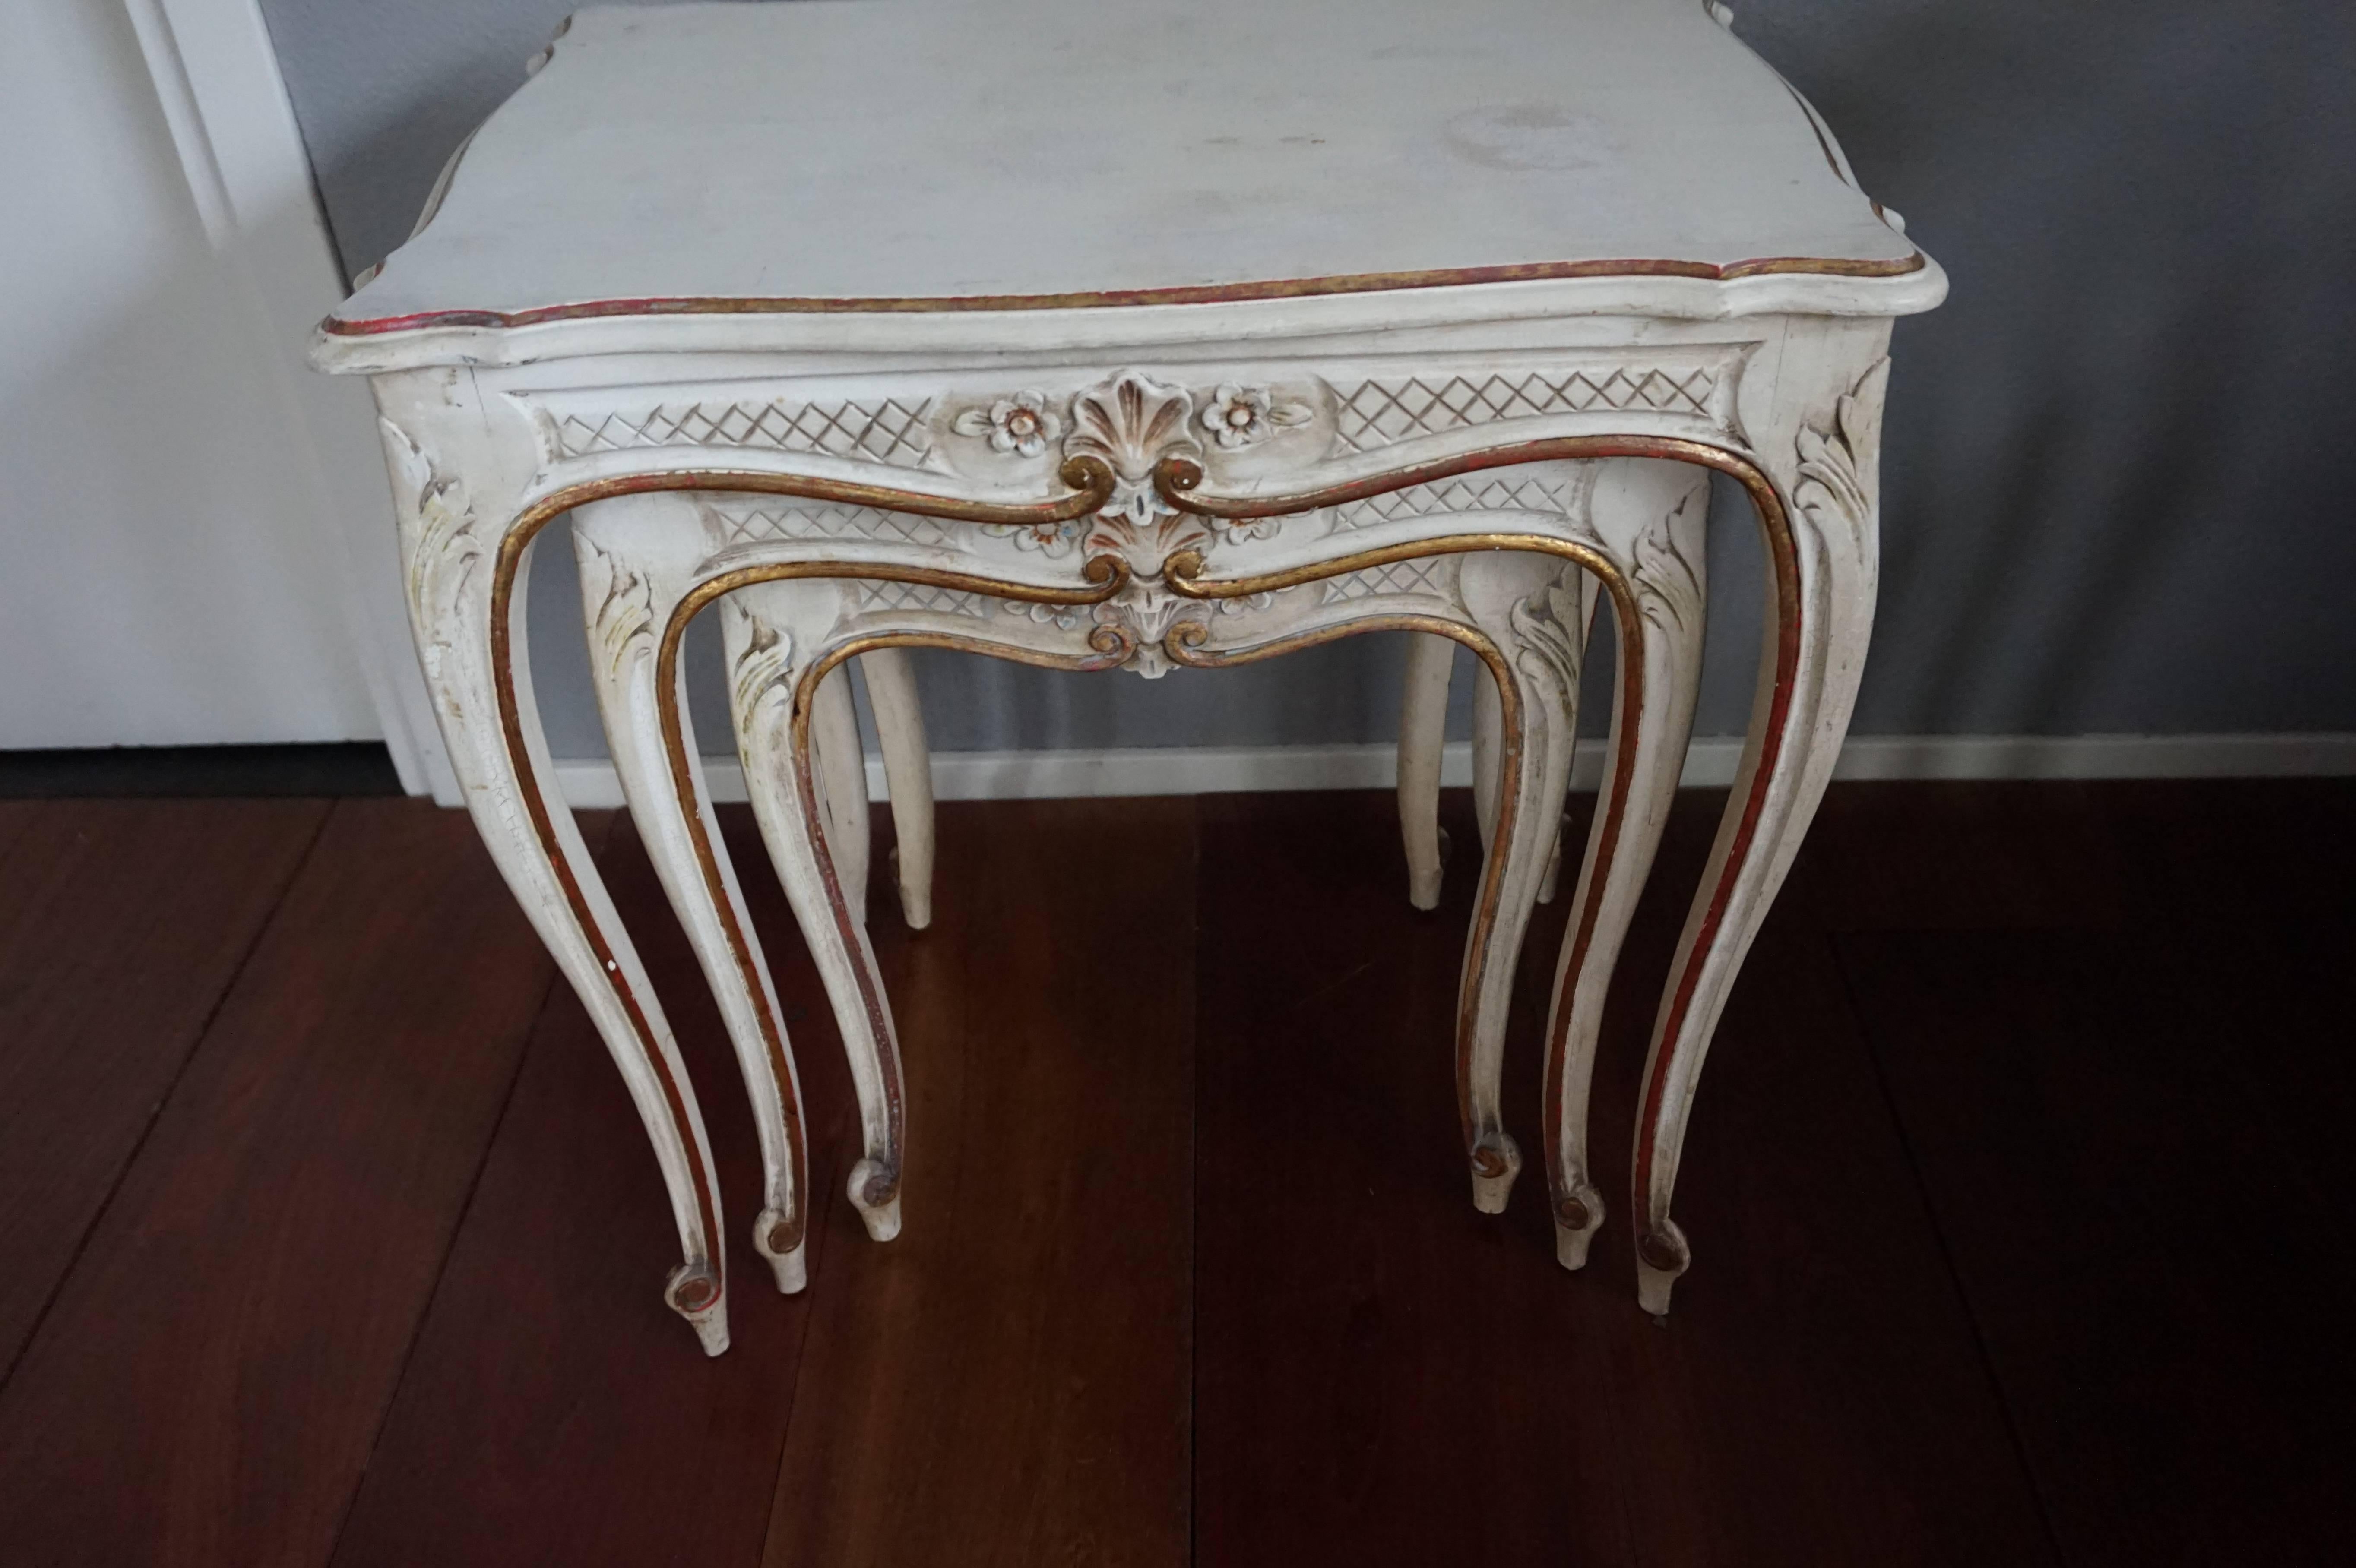 Early 20th Century Italian or French Nest of Tables in Beige-White with Gilding 3